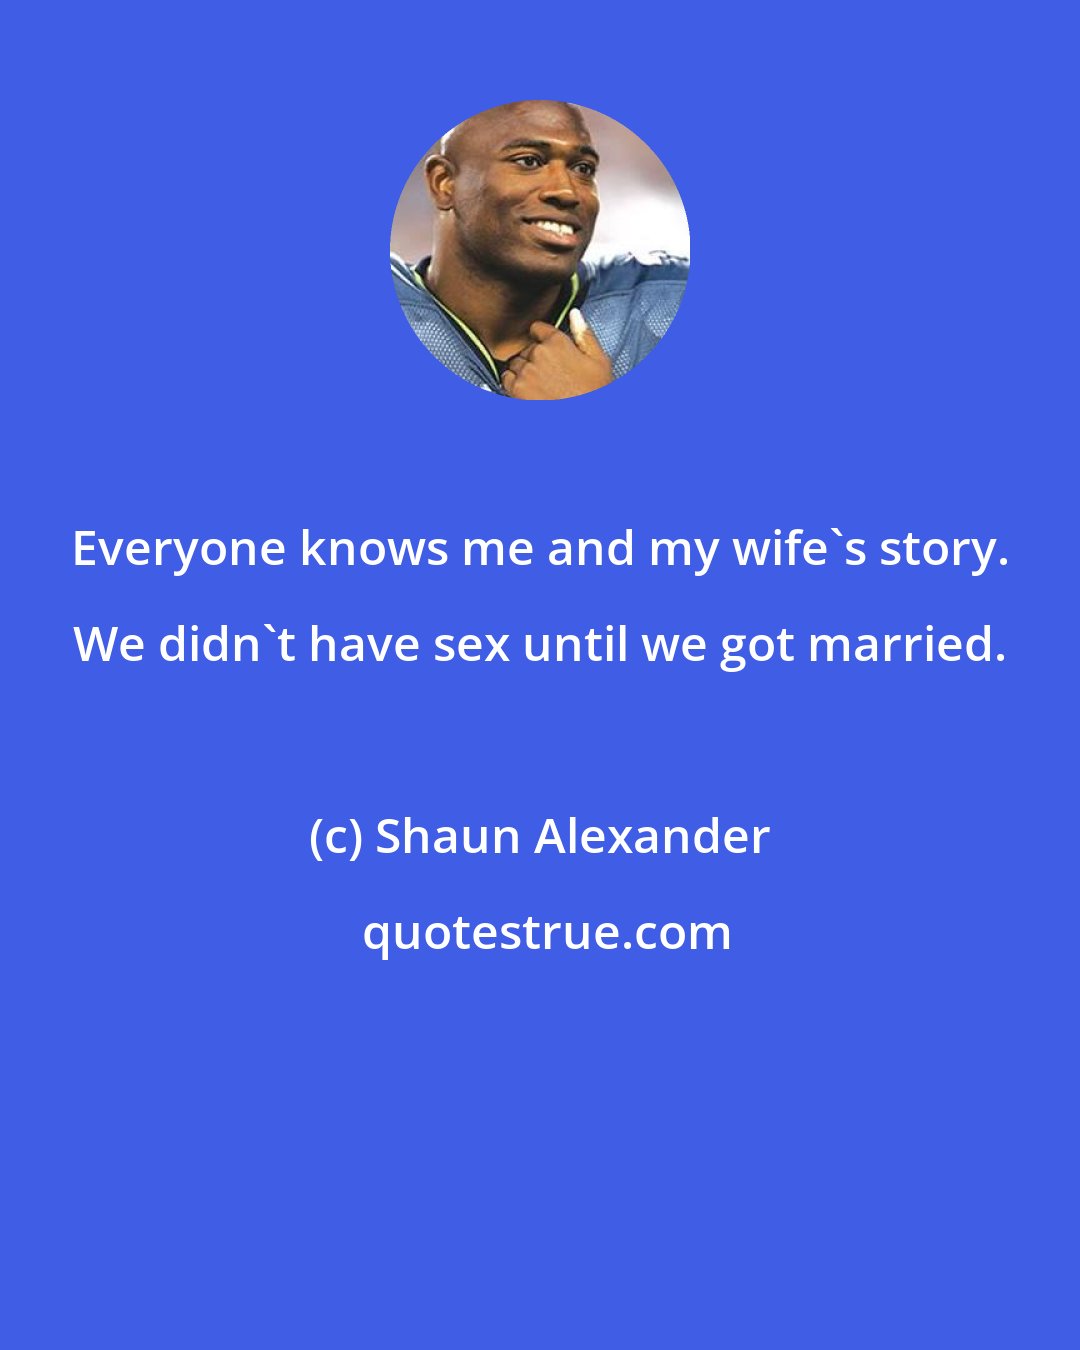 Shaun Alexander: Everyone knows me and my wife's story. We didn't have sex until we got married.